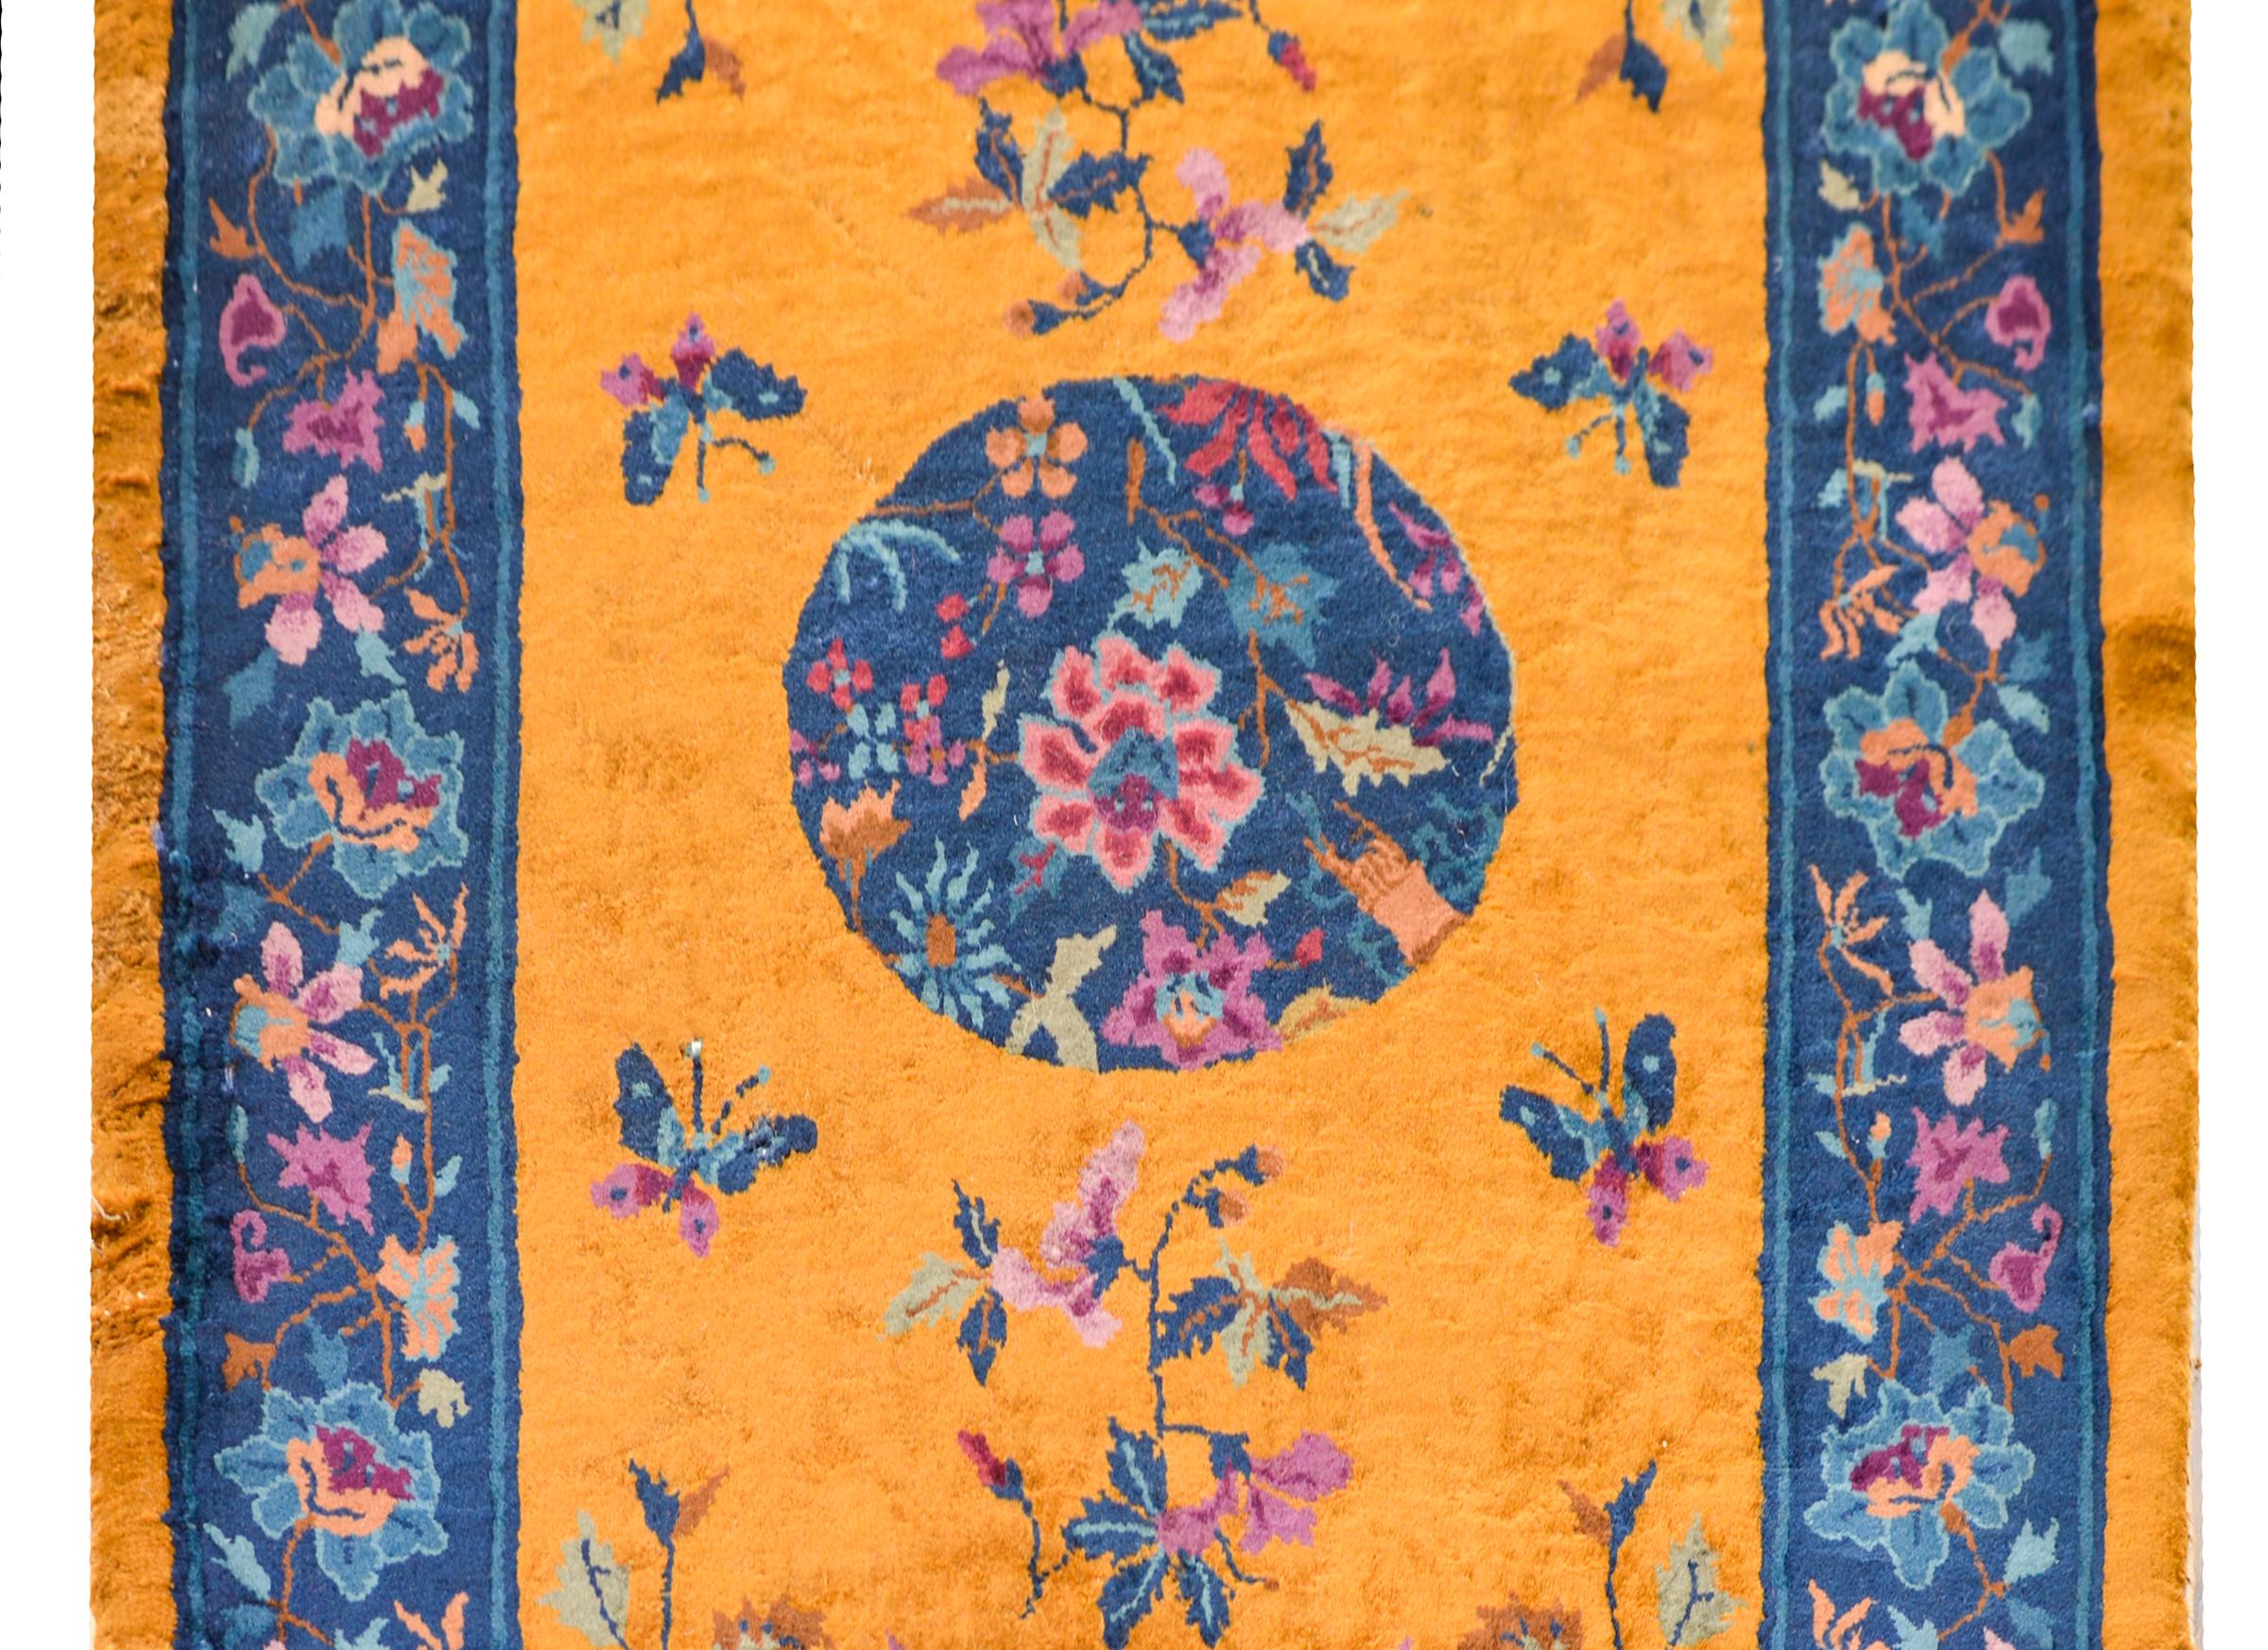 A brilliant and beautiful early 20th century Chinese Art Deco rug with a wonderful central floral medallion containing auspicious flowers including peonies, chrysanthemum, prunus, and citron, and living amidst a field of flowers and butterflies and